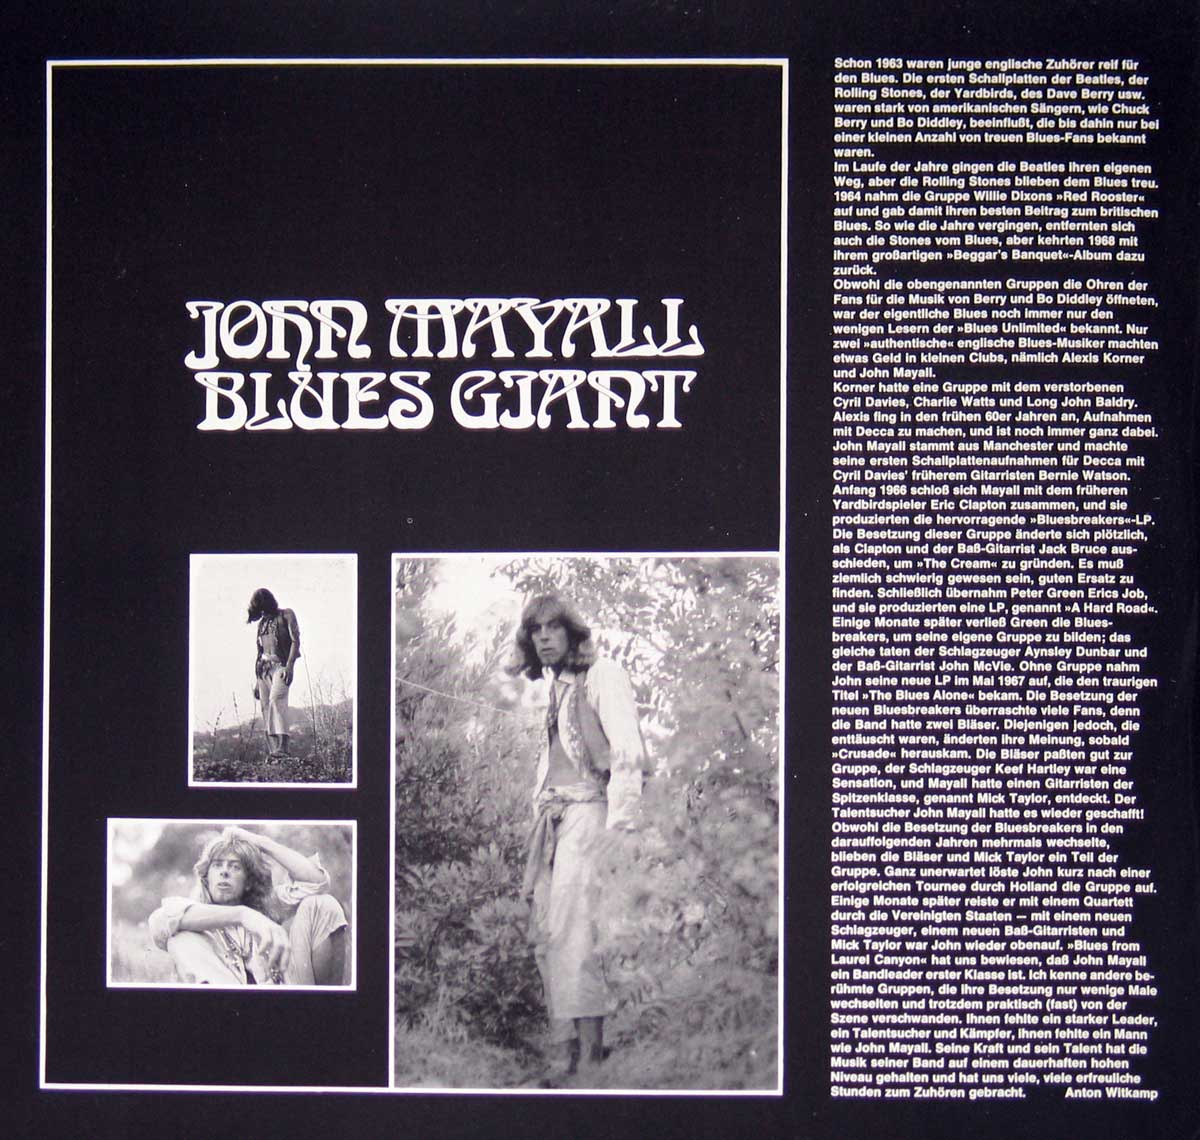 Photo of album Inner cover John Mayall - Blues Giant with Peter Green, Mick Taylor, Keef Hartley, John McVie 